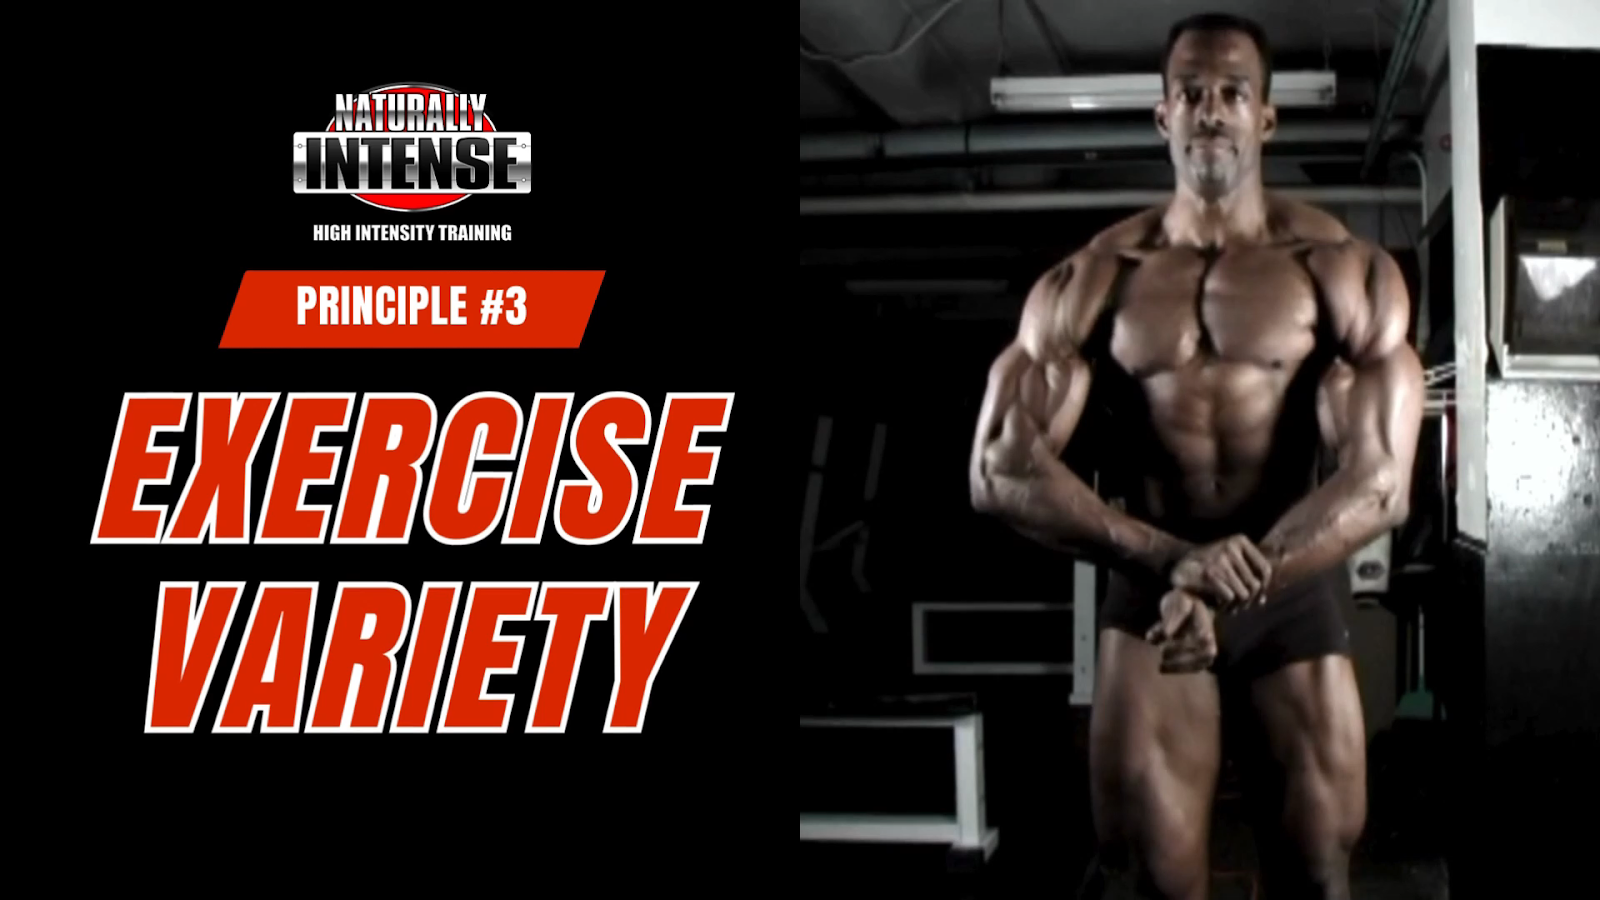 Principle 3 of Naturally Intense High Intensity Training is exercise variety